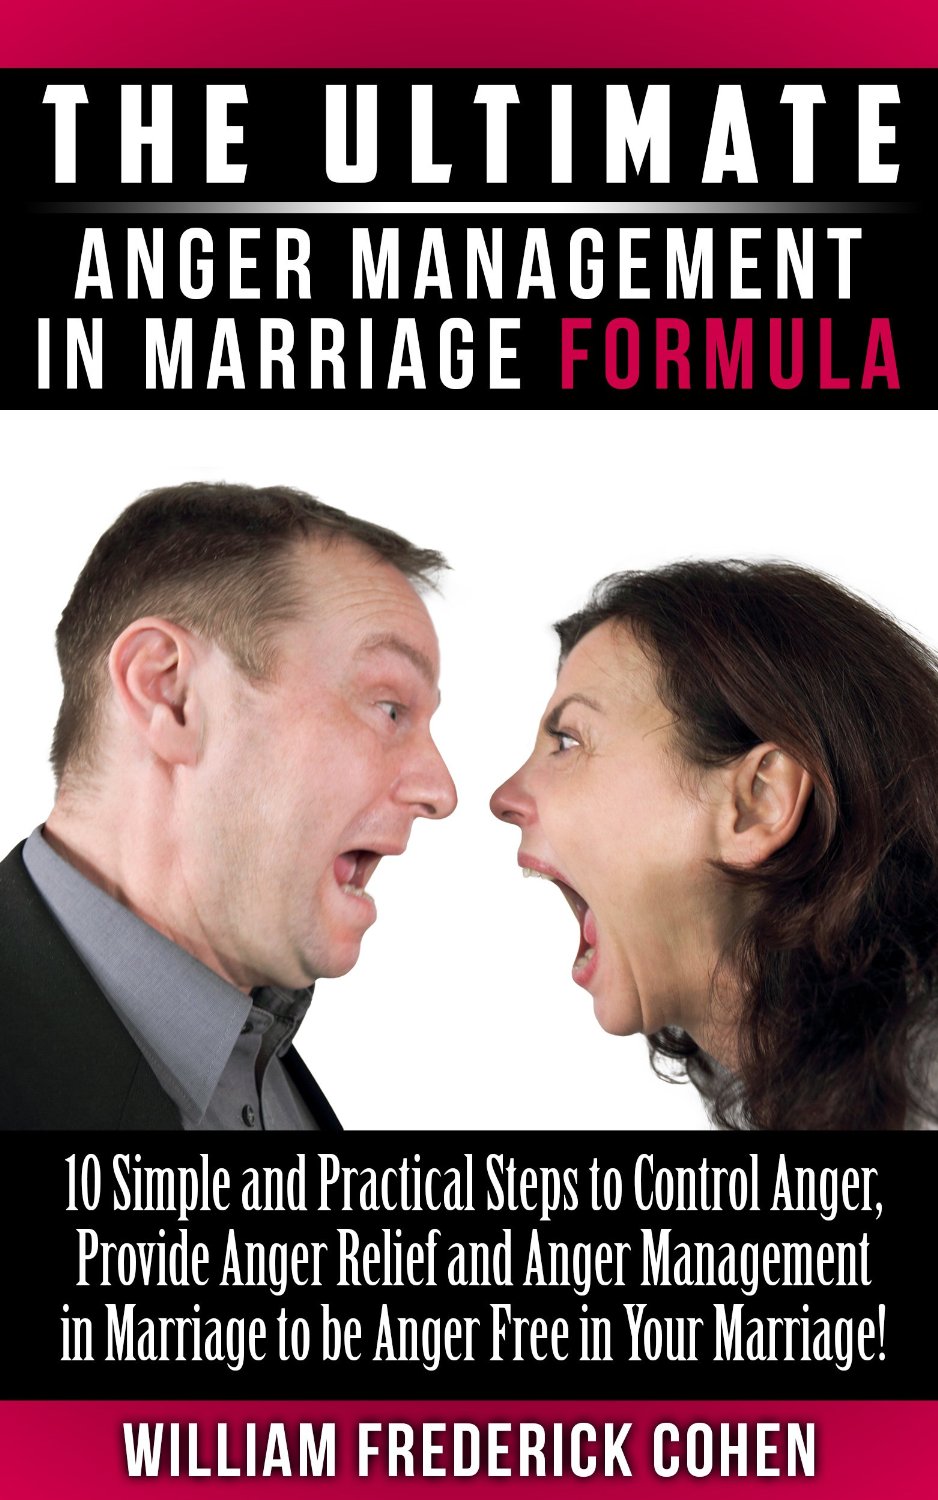 The Ultimate Anger Management in Marriage Formula: 10 Simple and Practical Steps to Control Anger, Provide Anger Relief and Anger Management in Marriage to be Anger Free in Your Marriage! by William Frederick Cohen